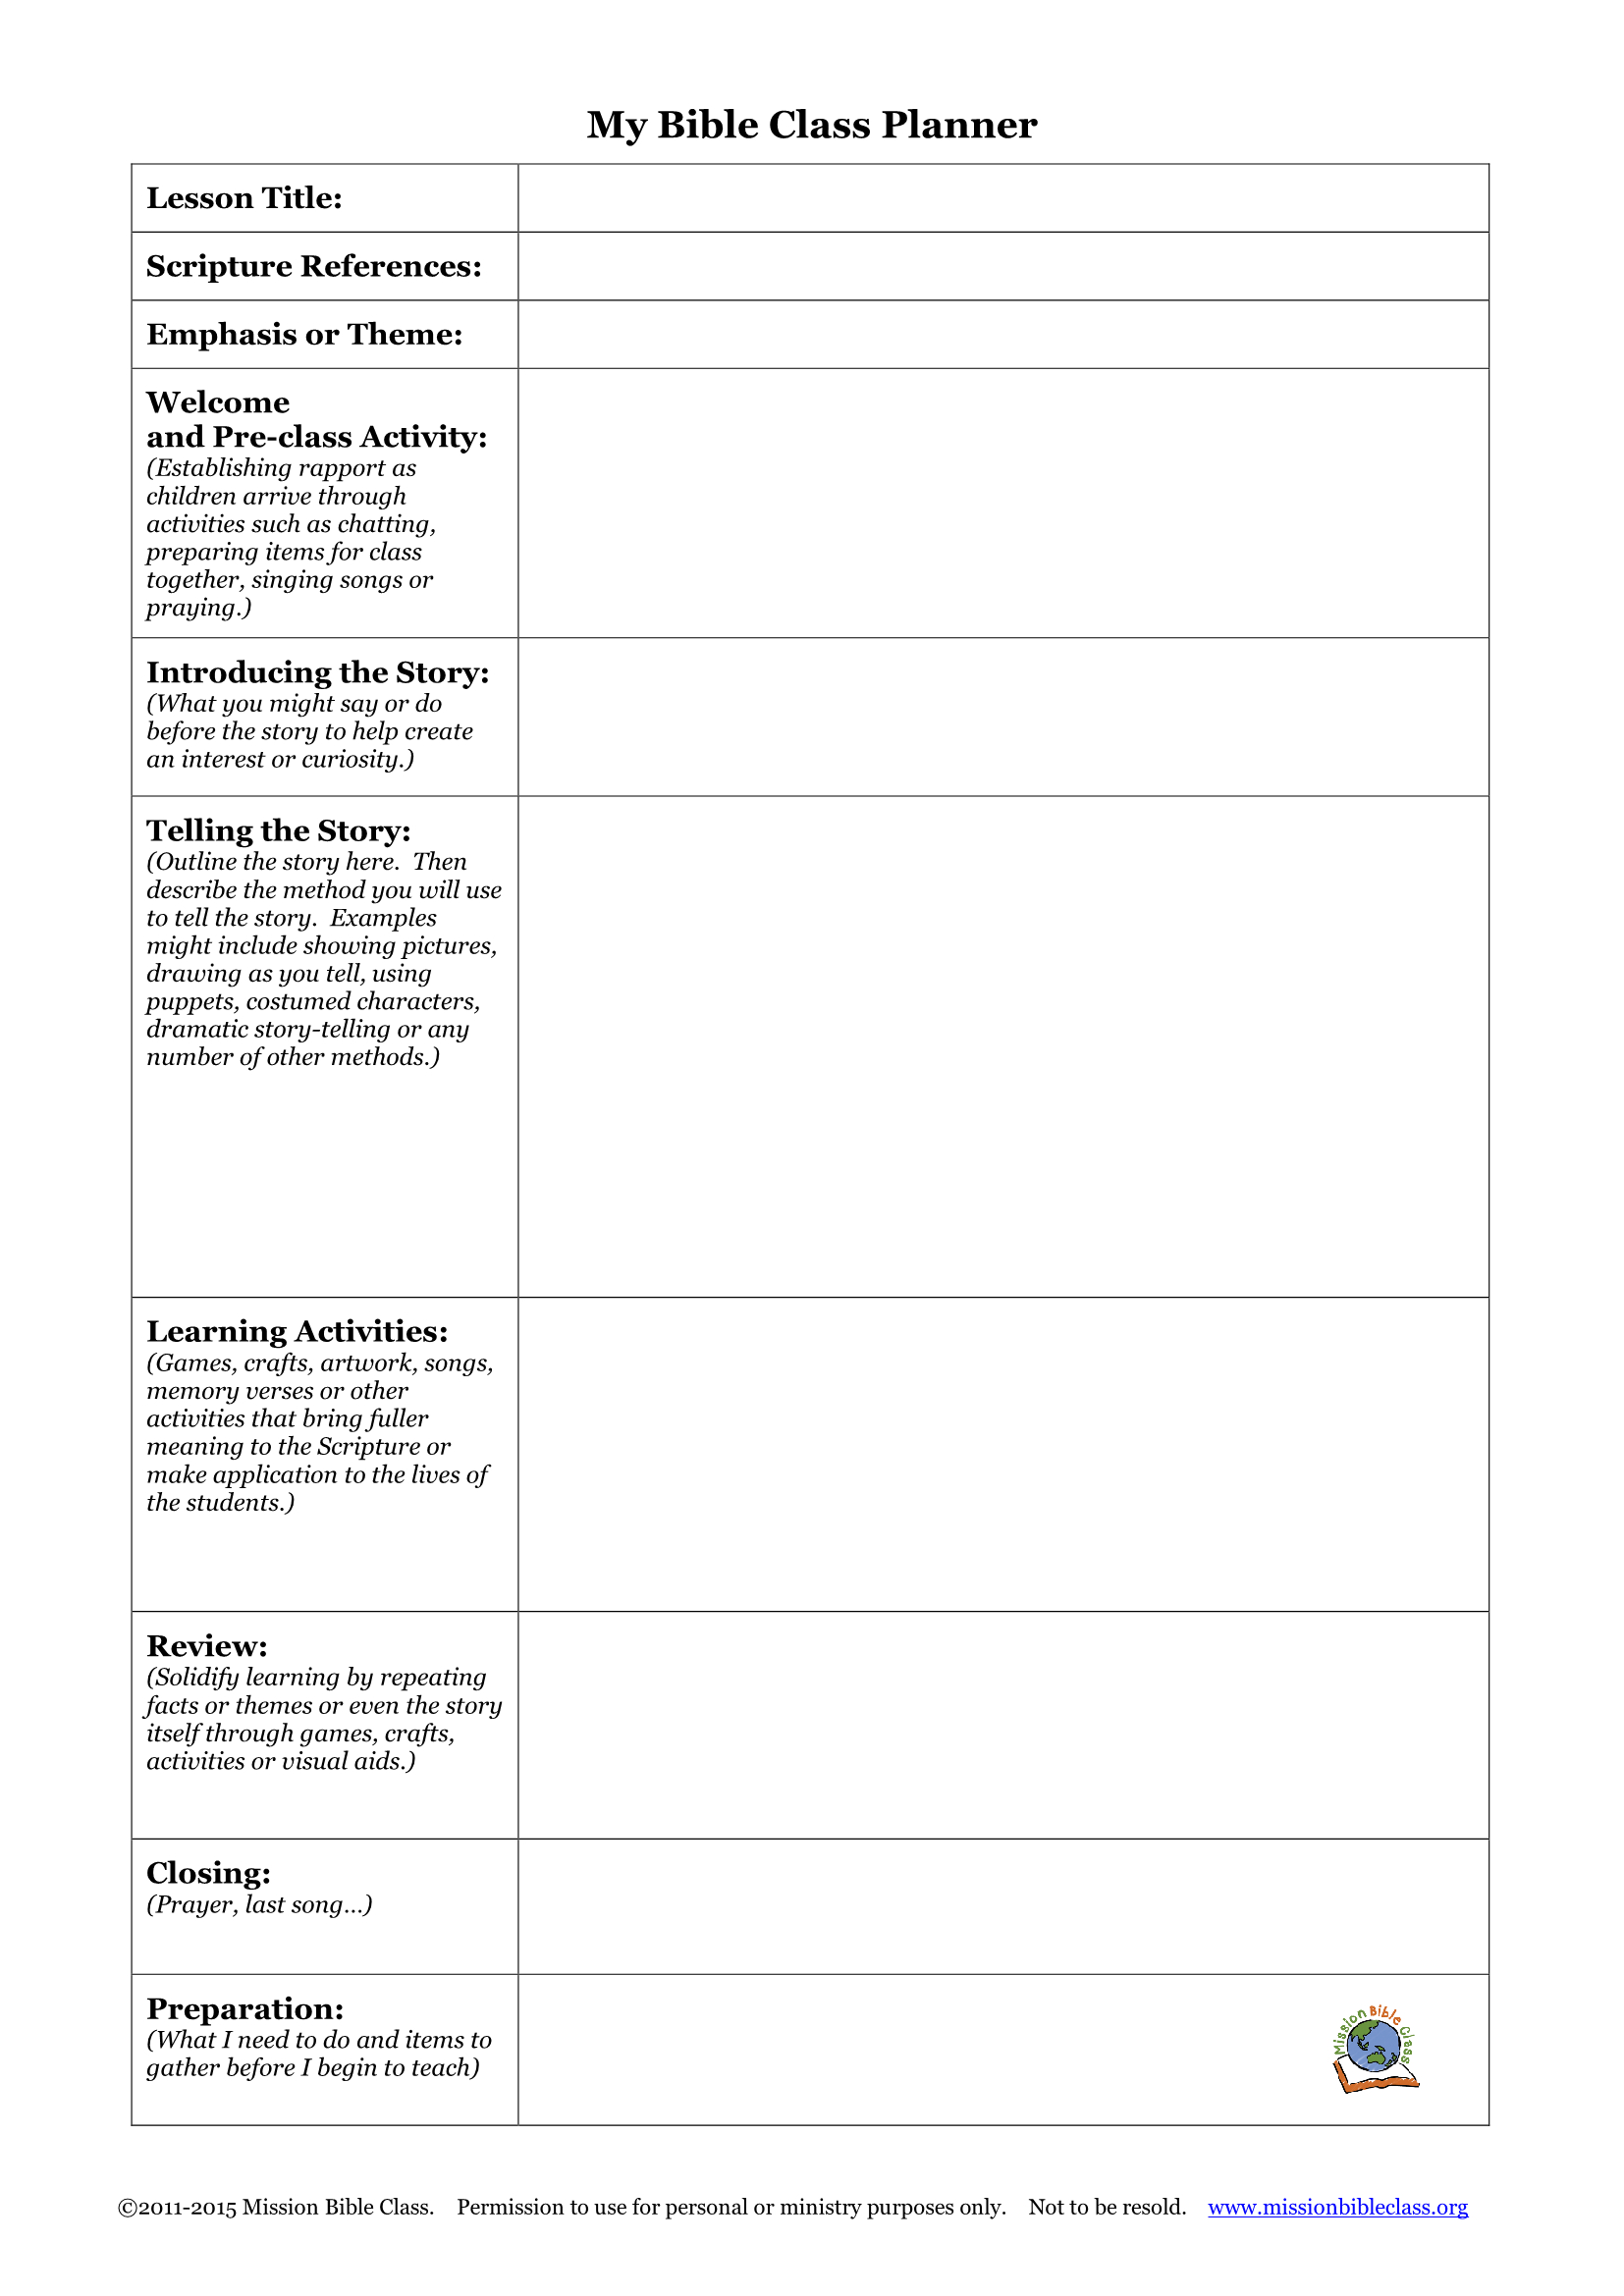 Blank Lesson Plan Templates To Print | Lesson Plan Templates Regarding Blank Syllabus Template